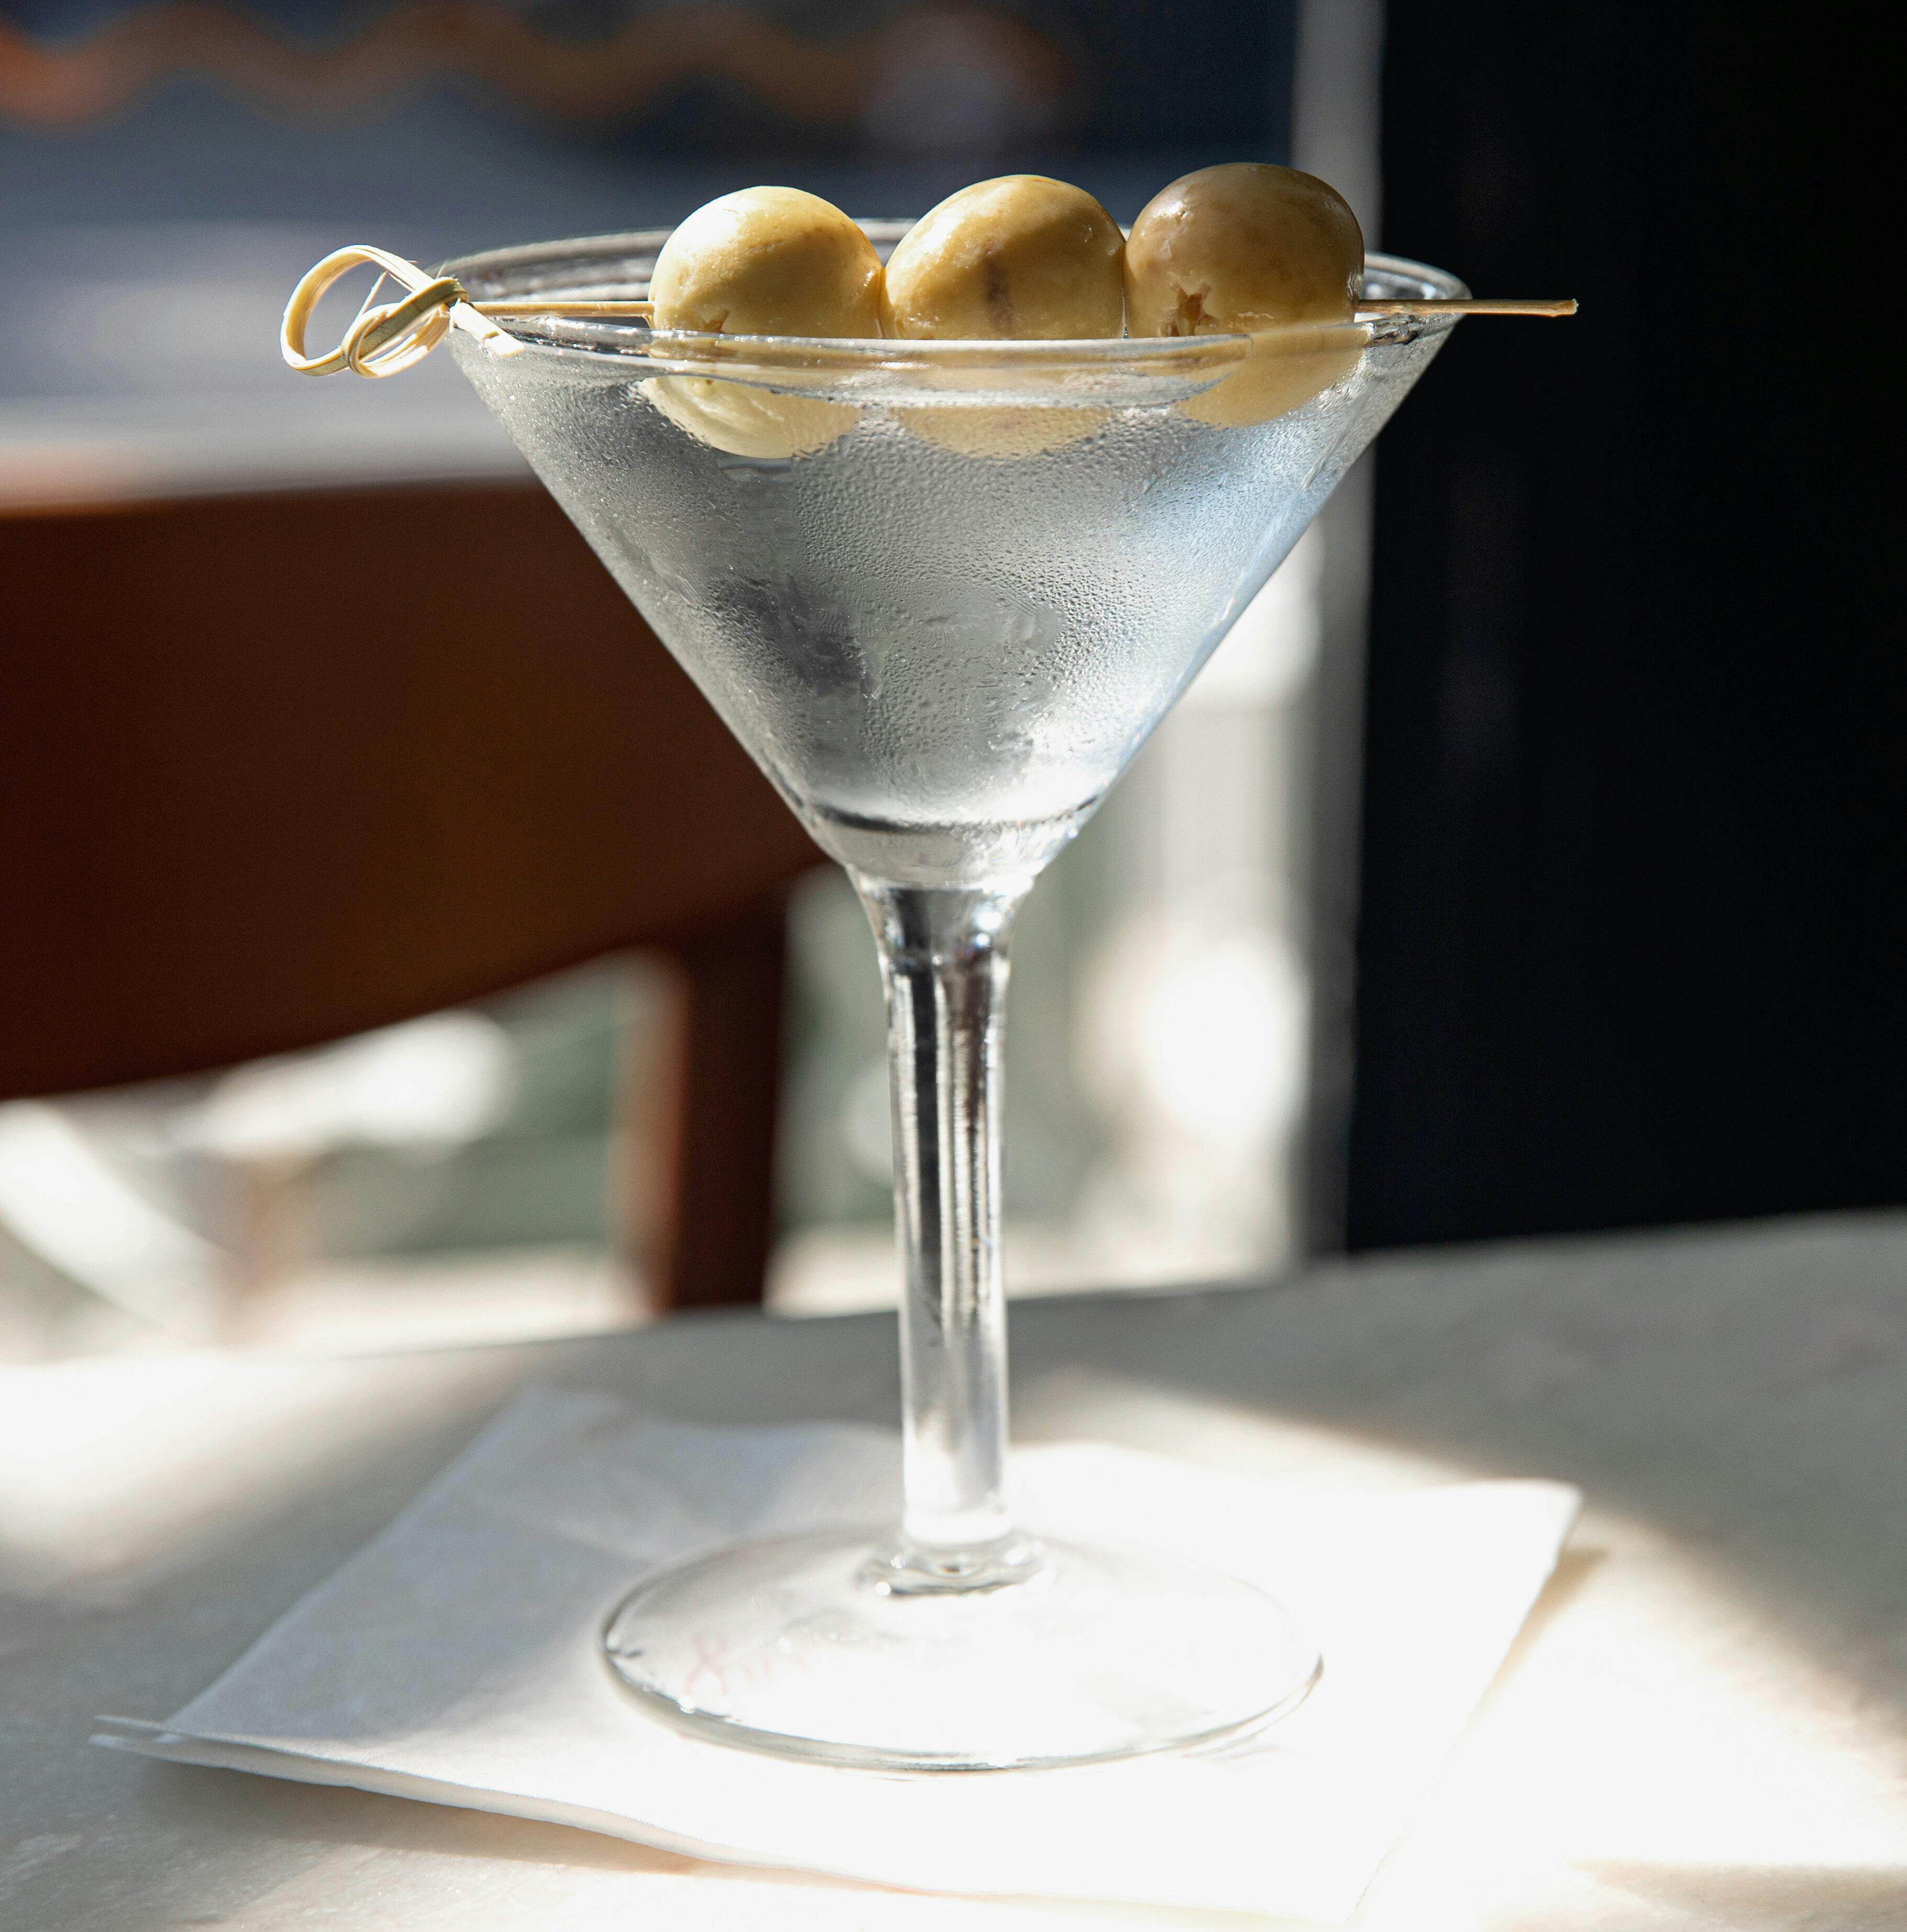 Dirty Martini from La Pecora Bianca in the Meatpacking District, NYC